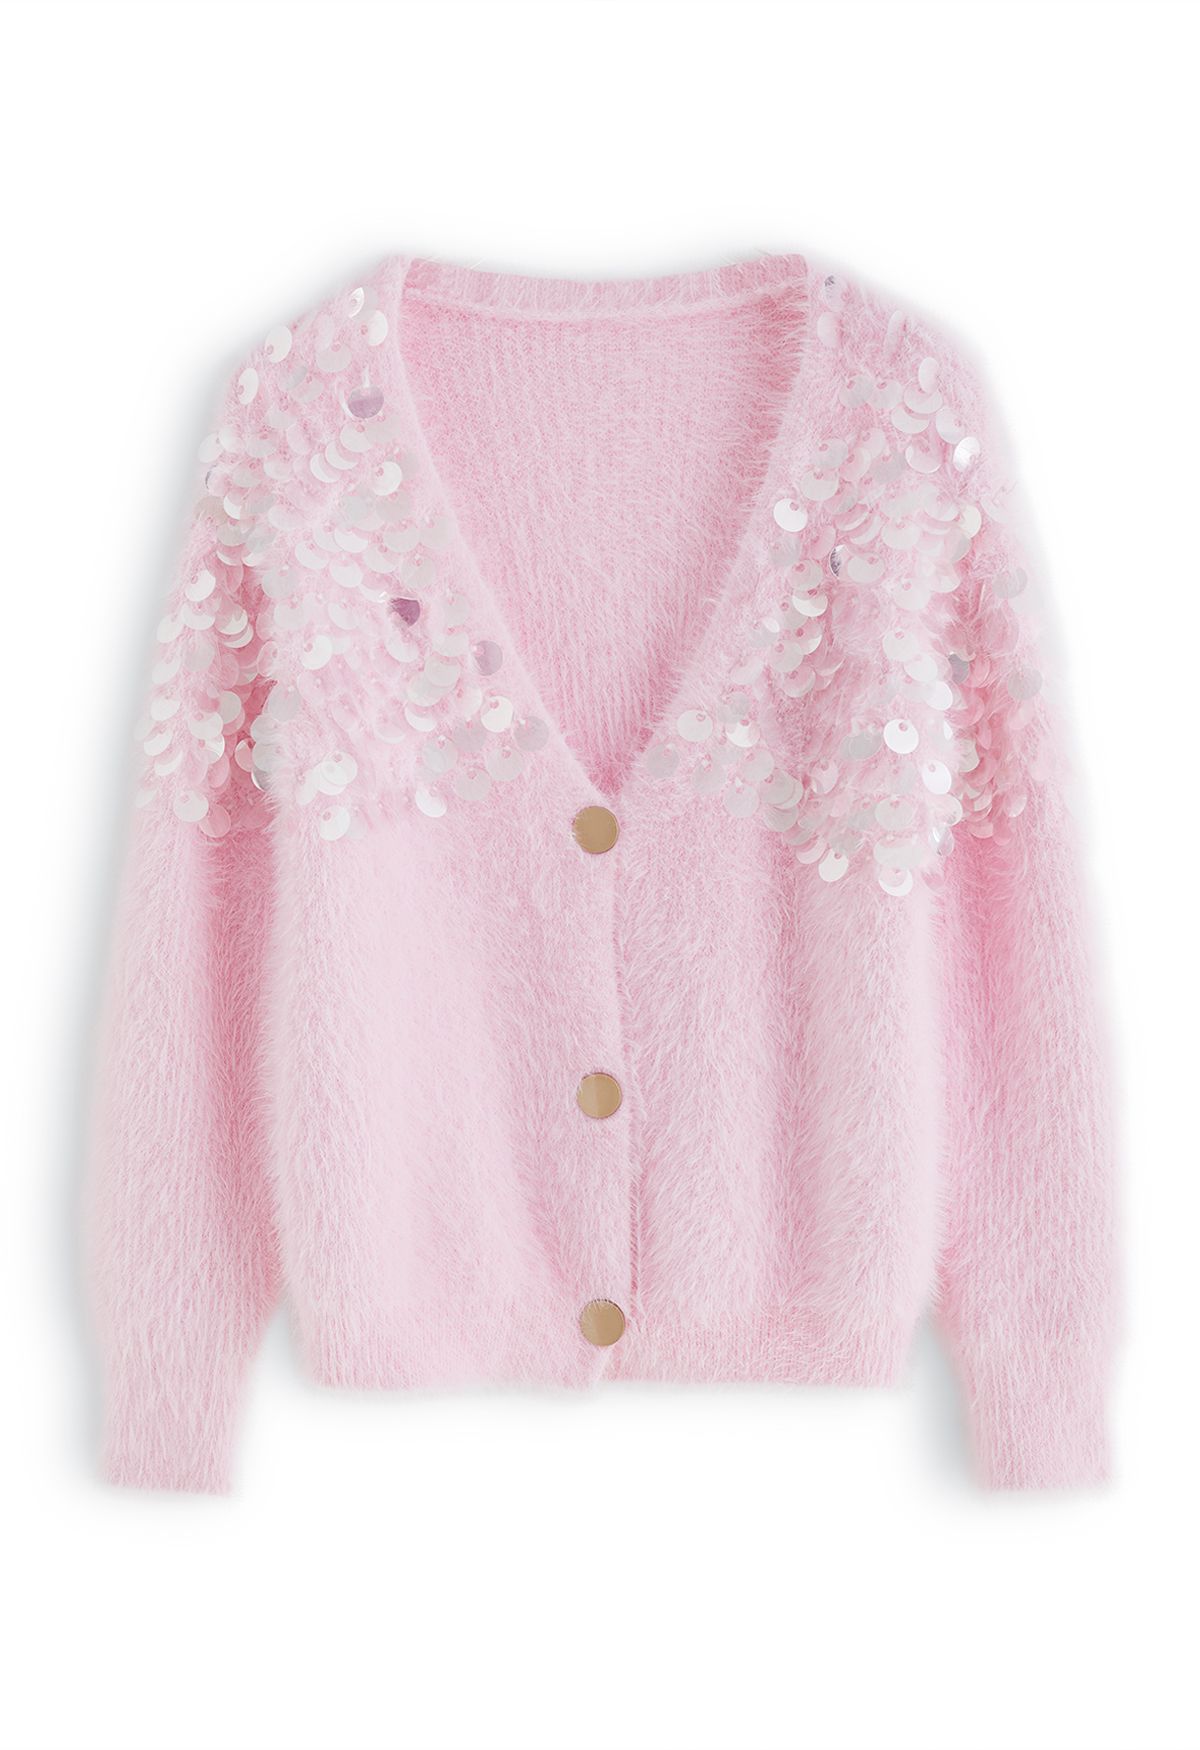 Sequins Indie in Fluffy Retro, Cardigan Crop Fashion and - Unique Buttoned V-Neck Pink